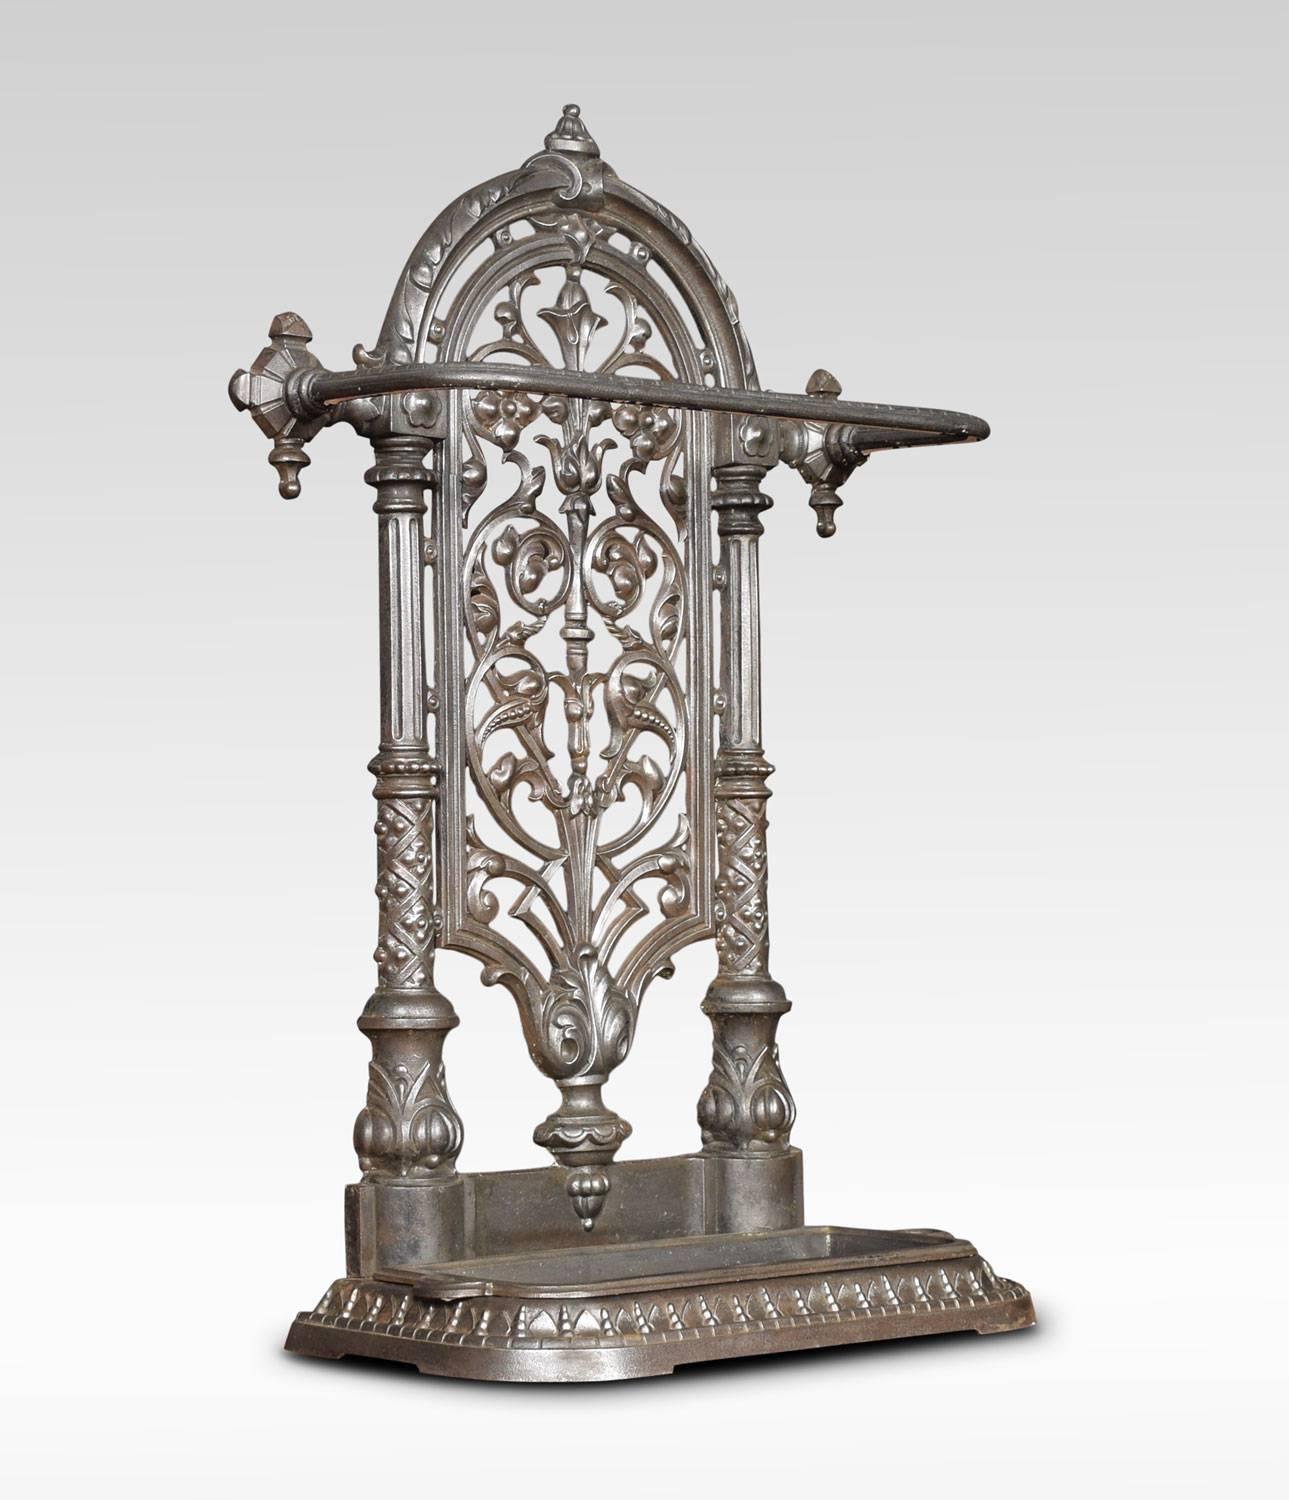 A 19th century Scottish Victorian cast iron stick / umbrella stand, from the Carron Iron Works, Falkirk. The stand No 13 design with shaped top above architectural pierced back, raised upon shaped base, with original drip tray.
Dimensions:
Height